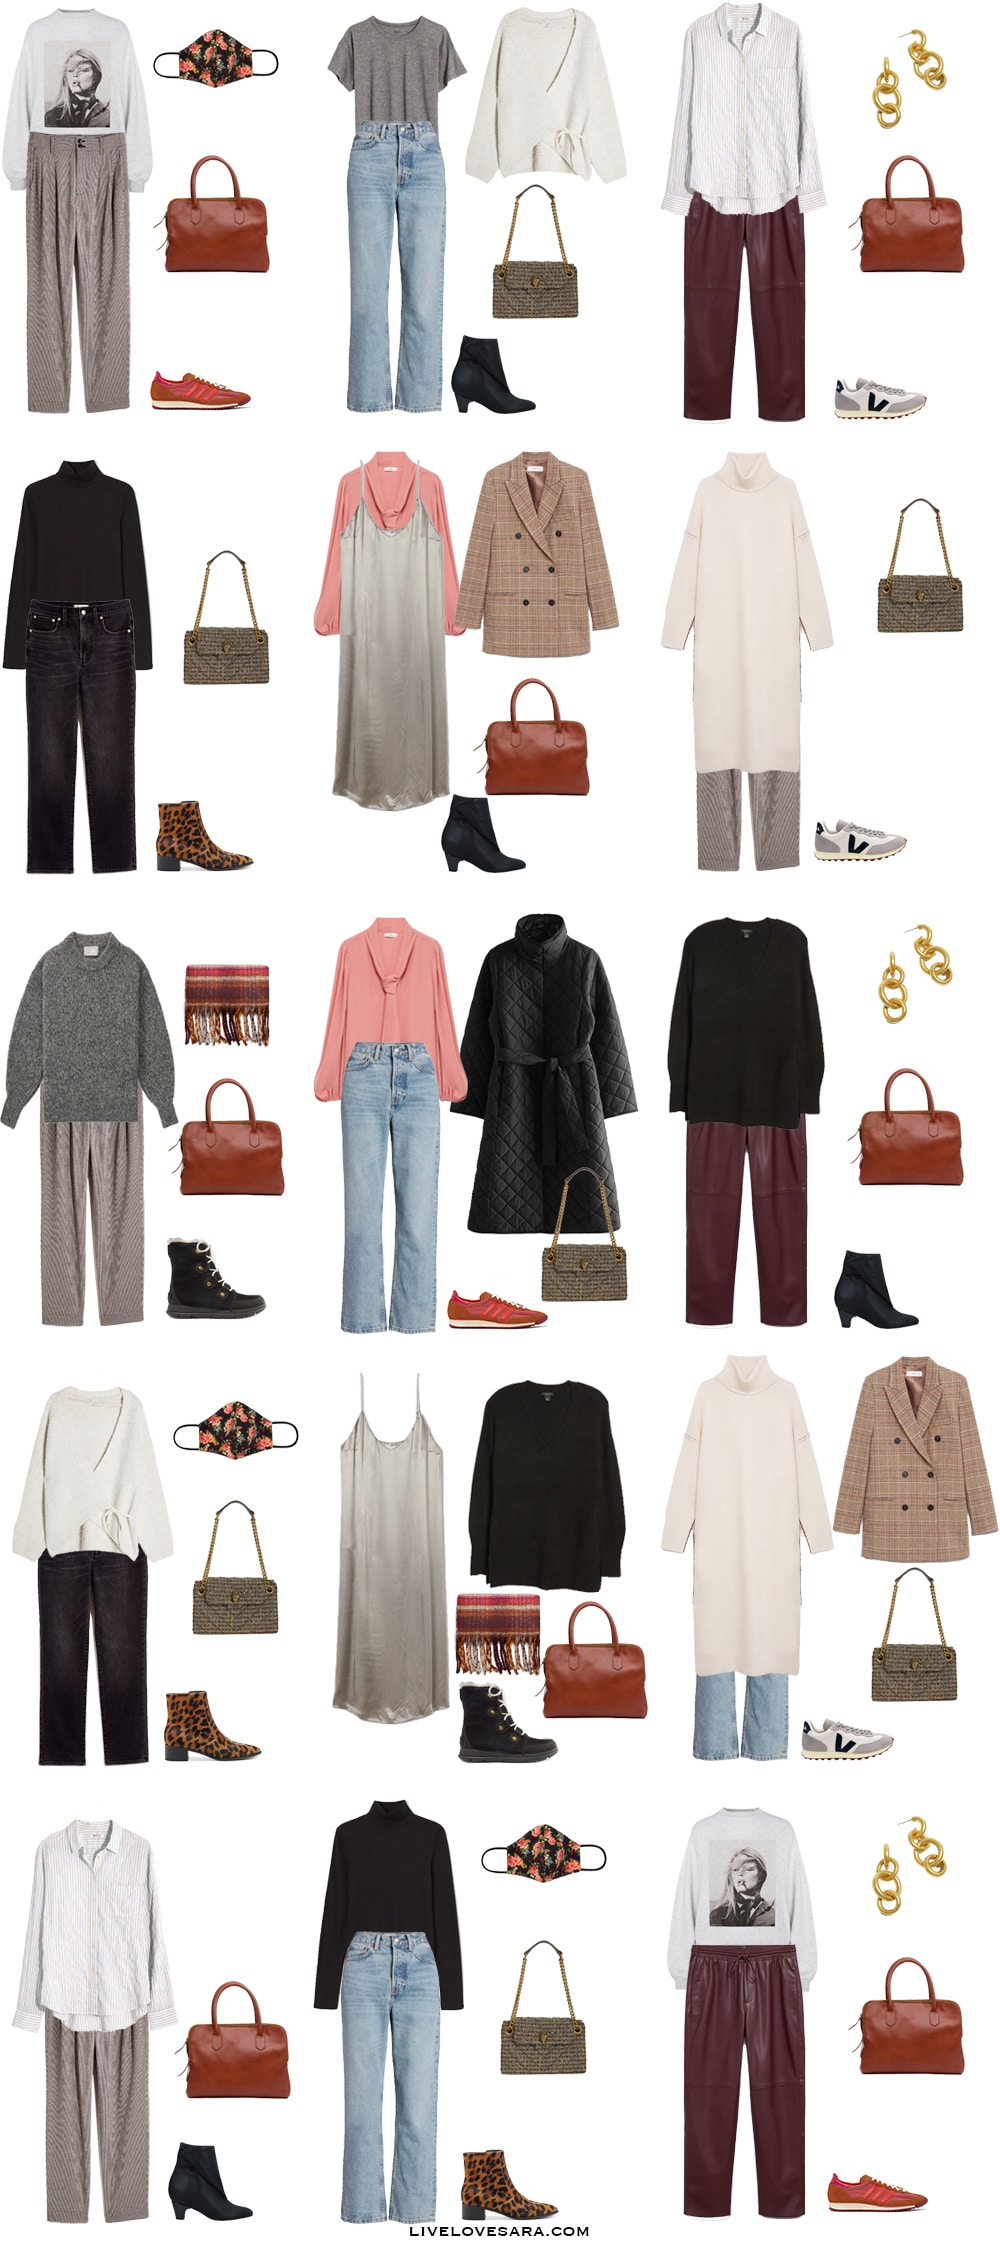 Winter Wardrobe Essentials - The Small Things Blog